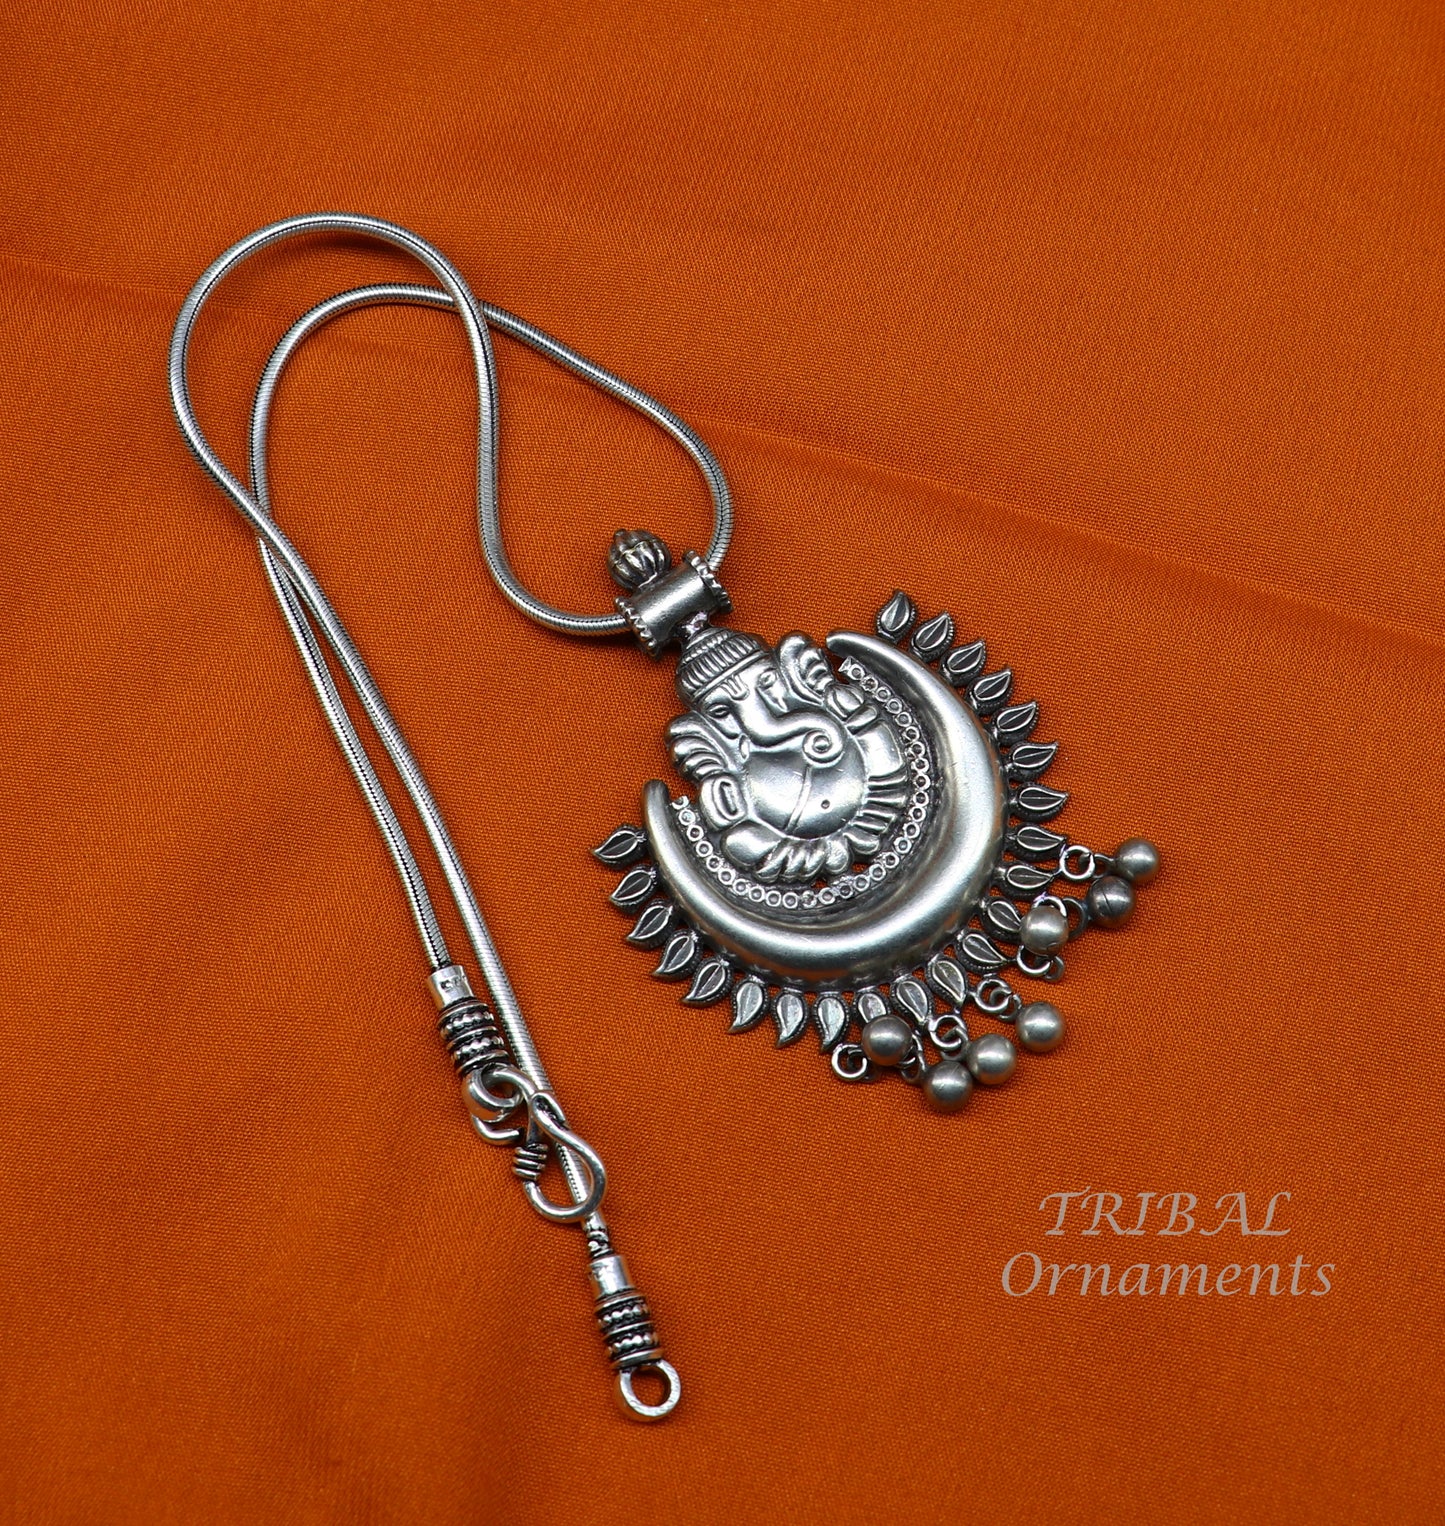 Fabulous lord ganesha design handmade 925 sterling silver pendant with pretty hanging bells tribal jewelry pendant necklace india nsp132 - TRIBAL ORNAMENTS